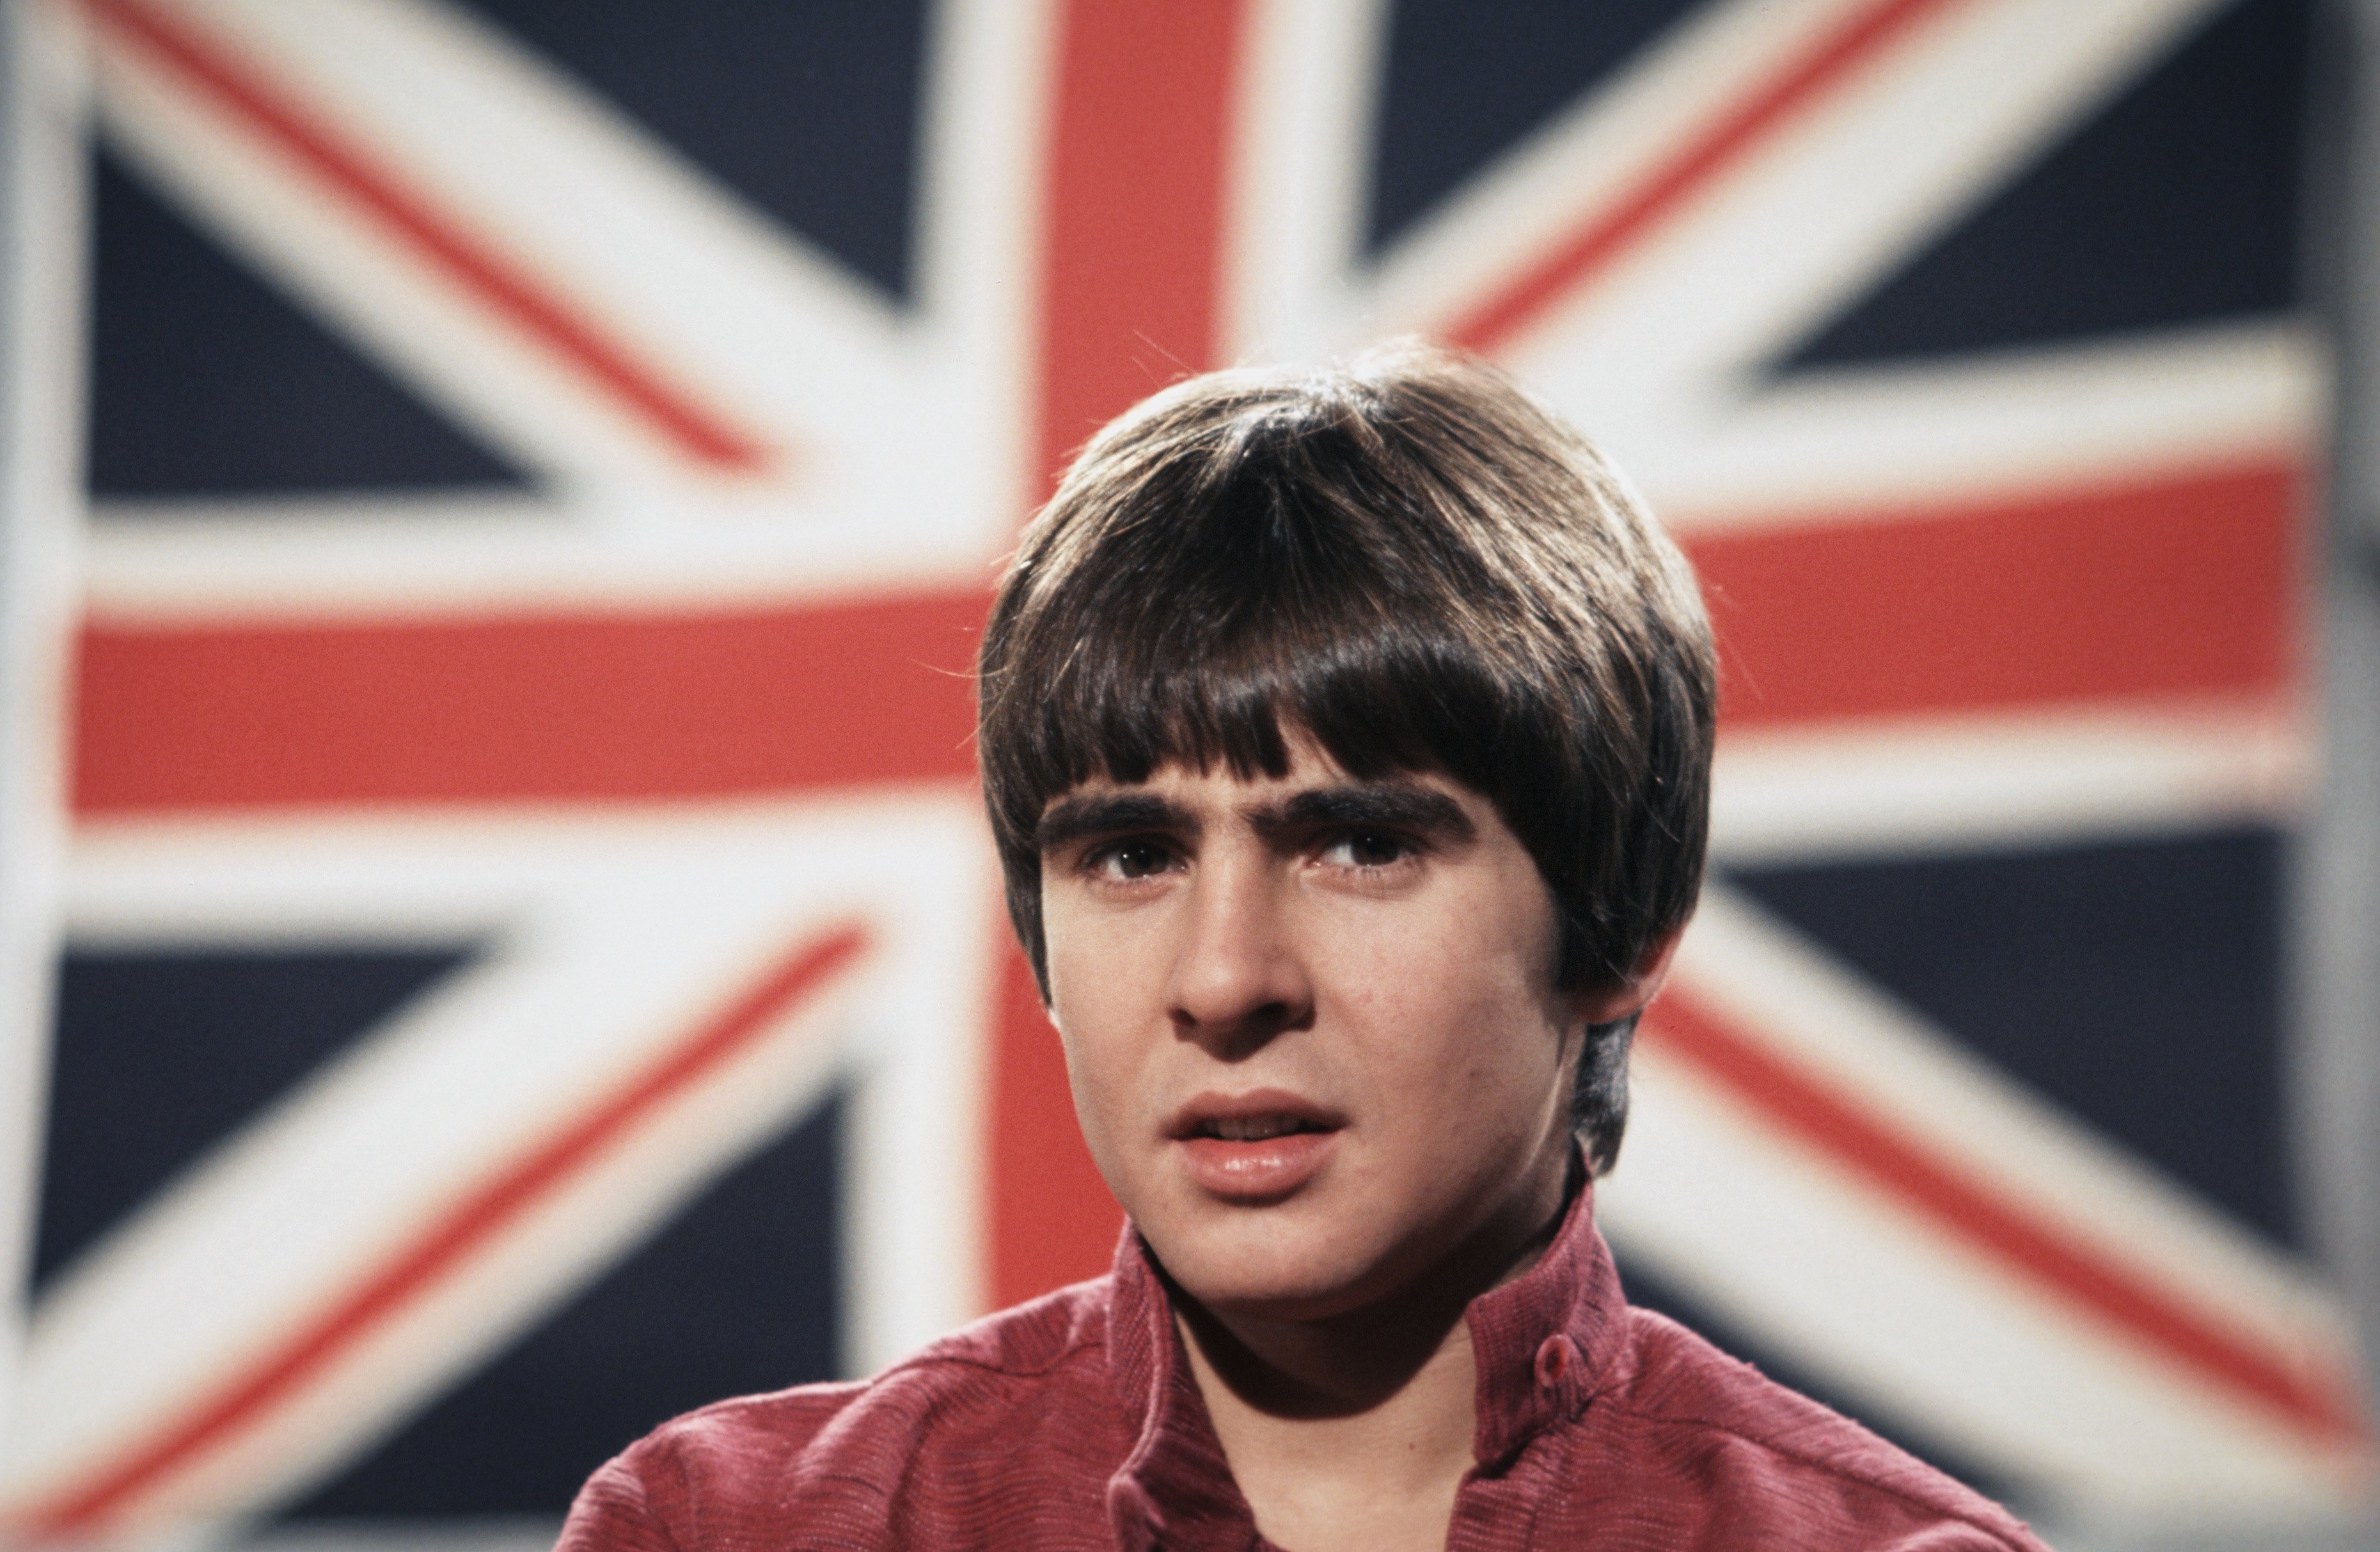 The Monkees' Davy Jones in front of a Union Jack